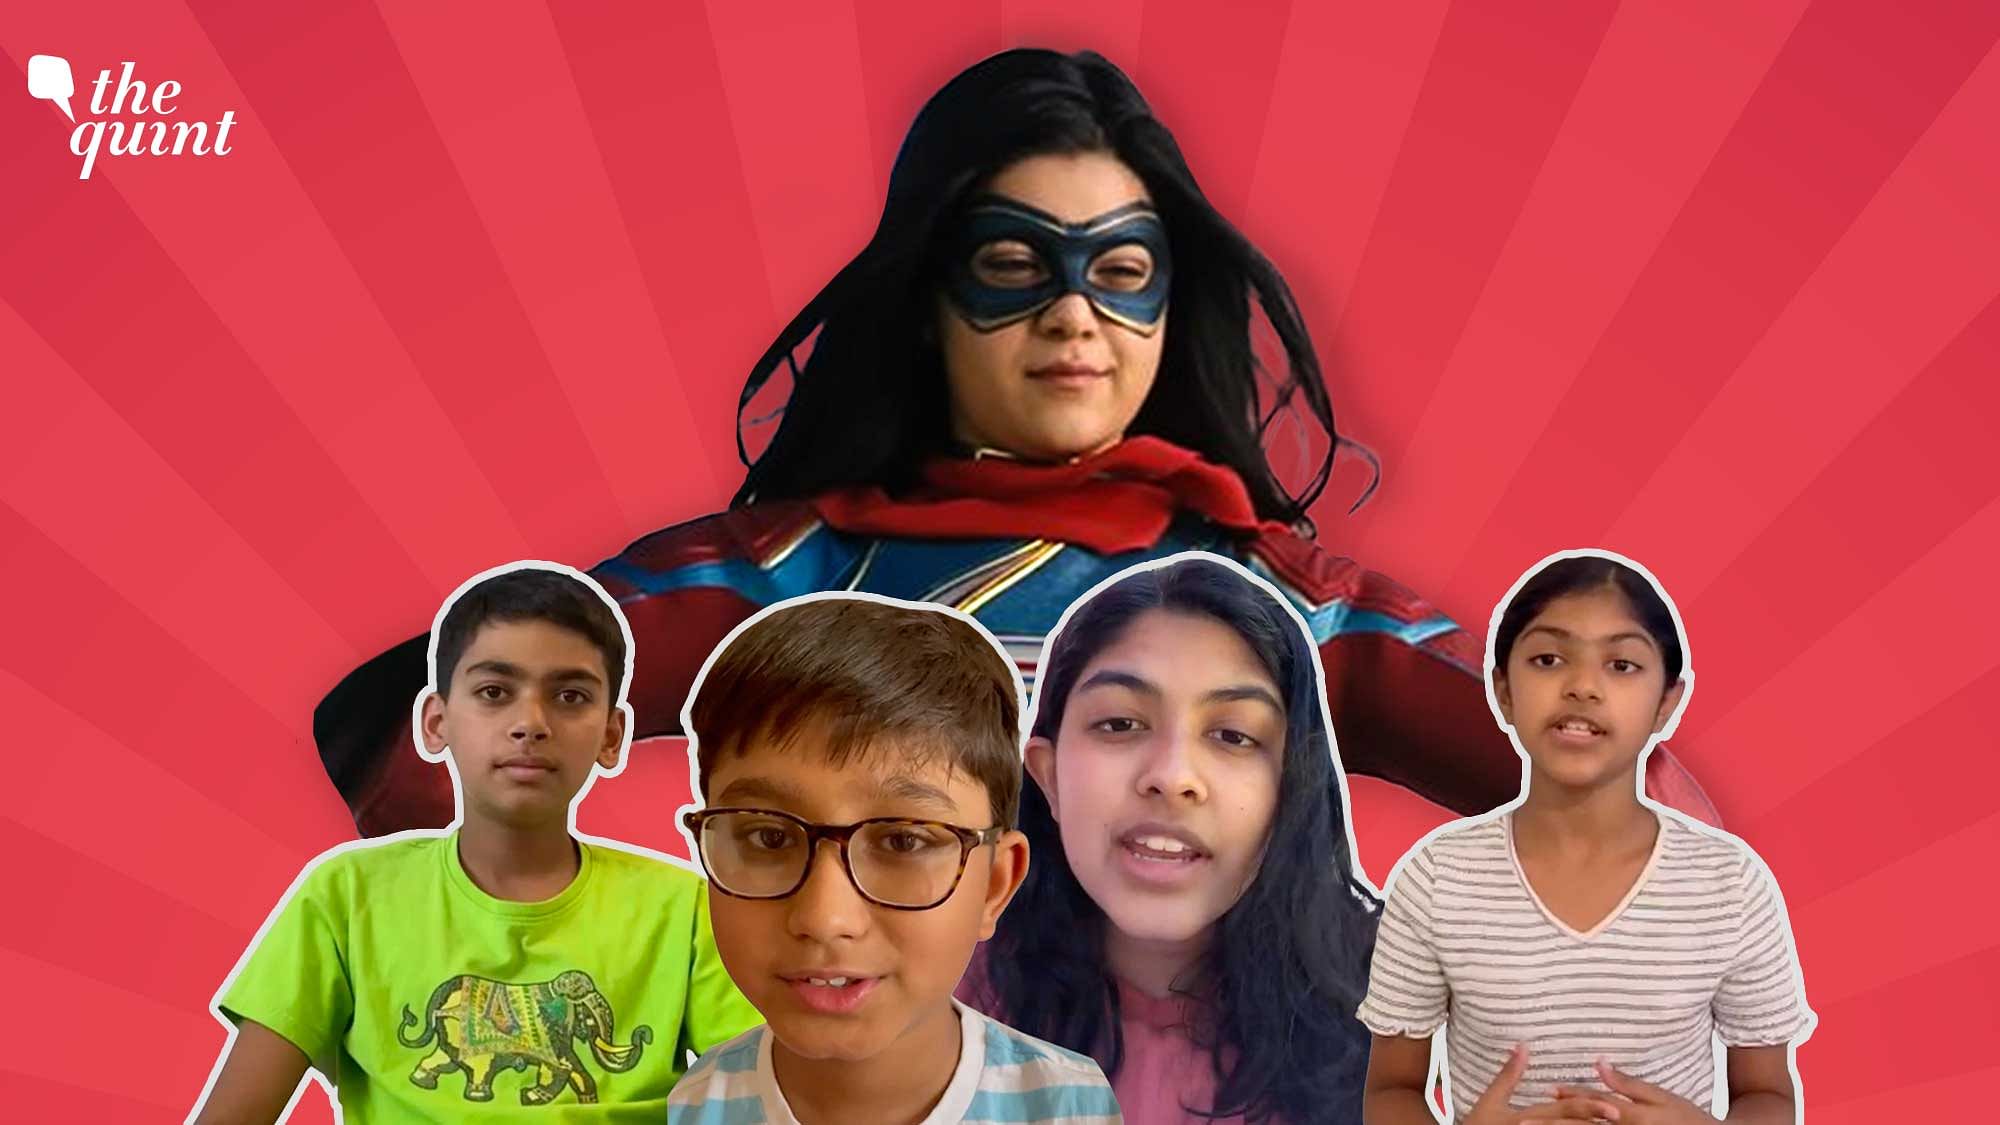 <div class="paragraphs"><p>Four South Asian kids living in the US spoke to <strong>The Quint</strong> about their impressions of the show, which was aimed at representing them in the superhero universe.</p></div>